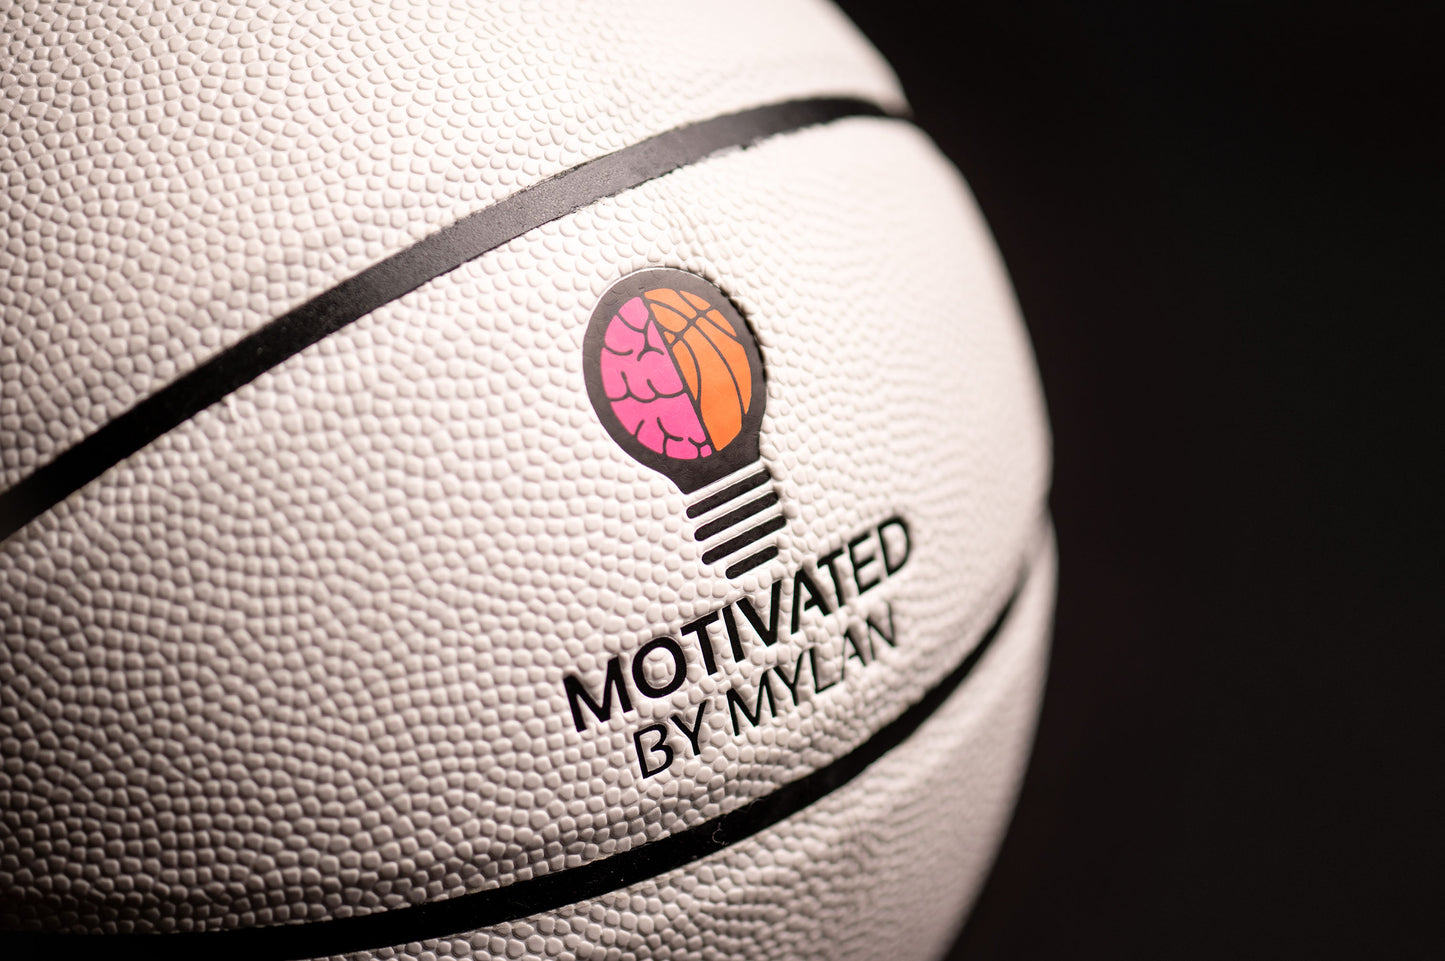 The Motivated Basketball | 29.5 Leather Indoor/Outdoor